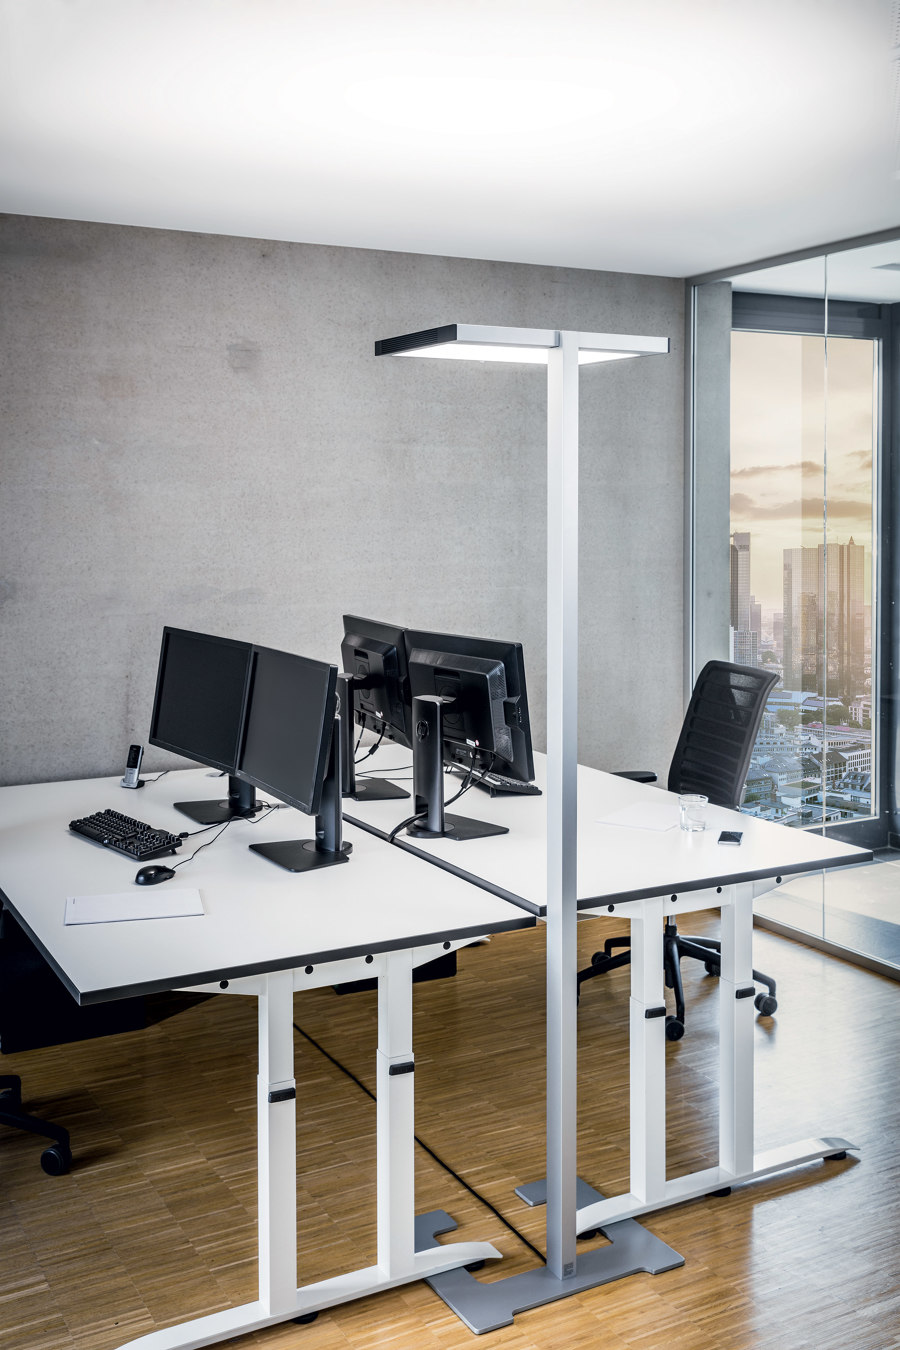 LUCTRA VITAWORK: Energy saving means environmental protection | Arquitectura